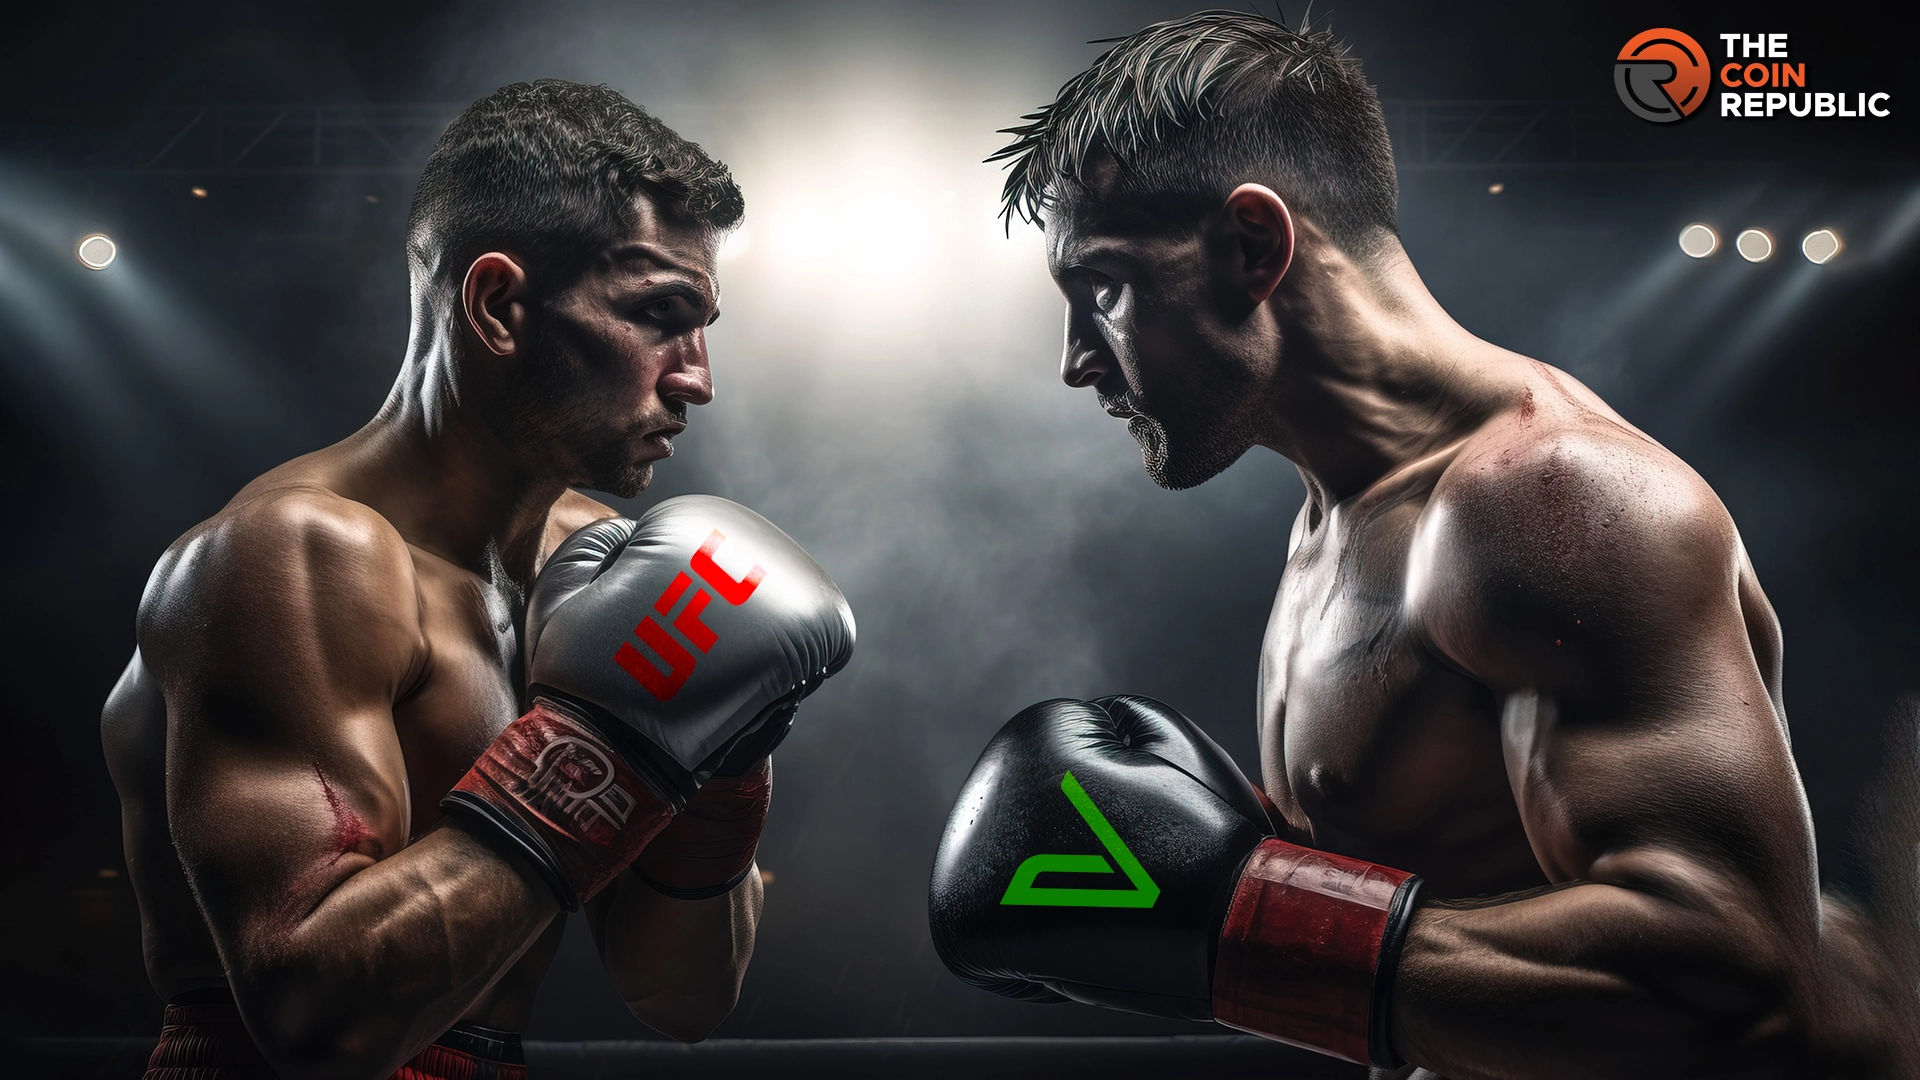 VeChain Announced Heavyweight Deal With UFC, Landed $100 Million